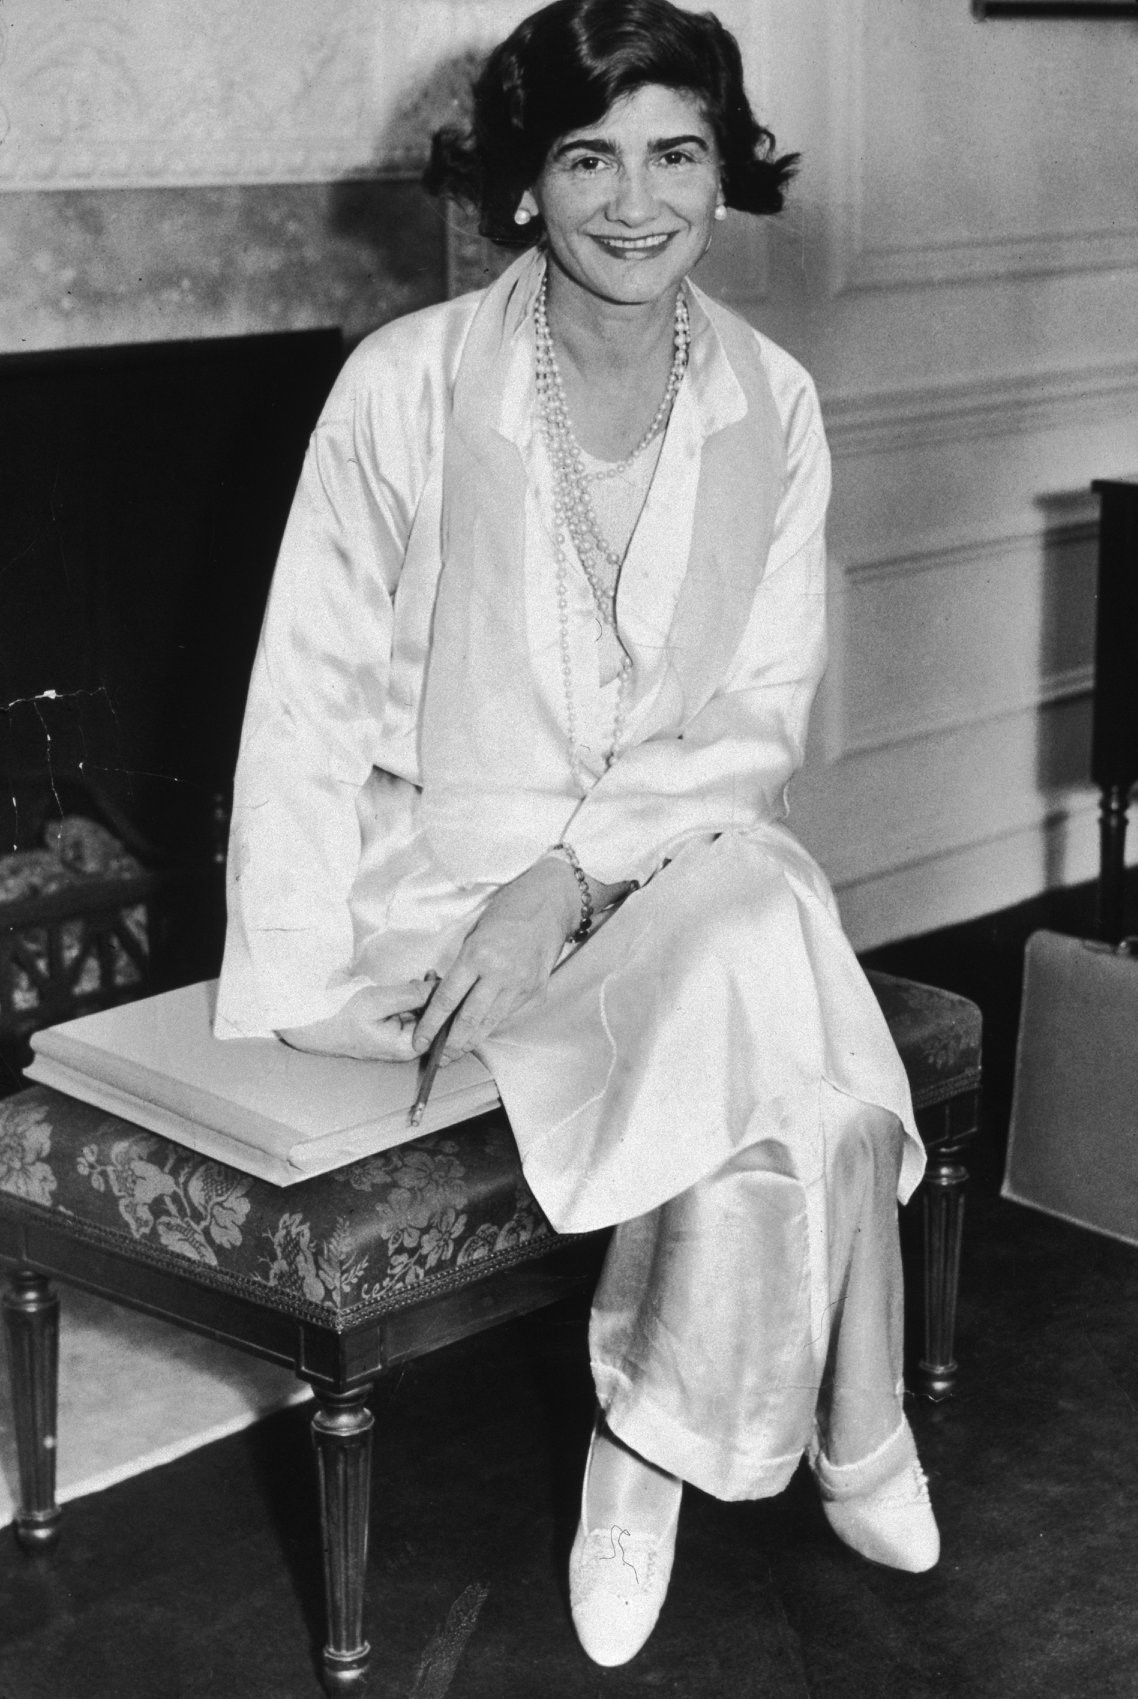 Gabrielle Chanel lounging with style in Venice, a city introduced to her by her friend José Maria Sert.